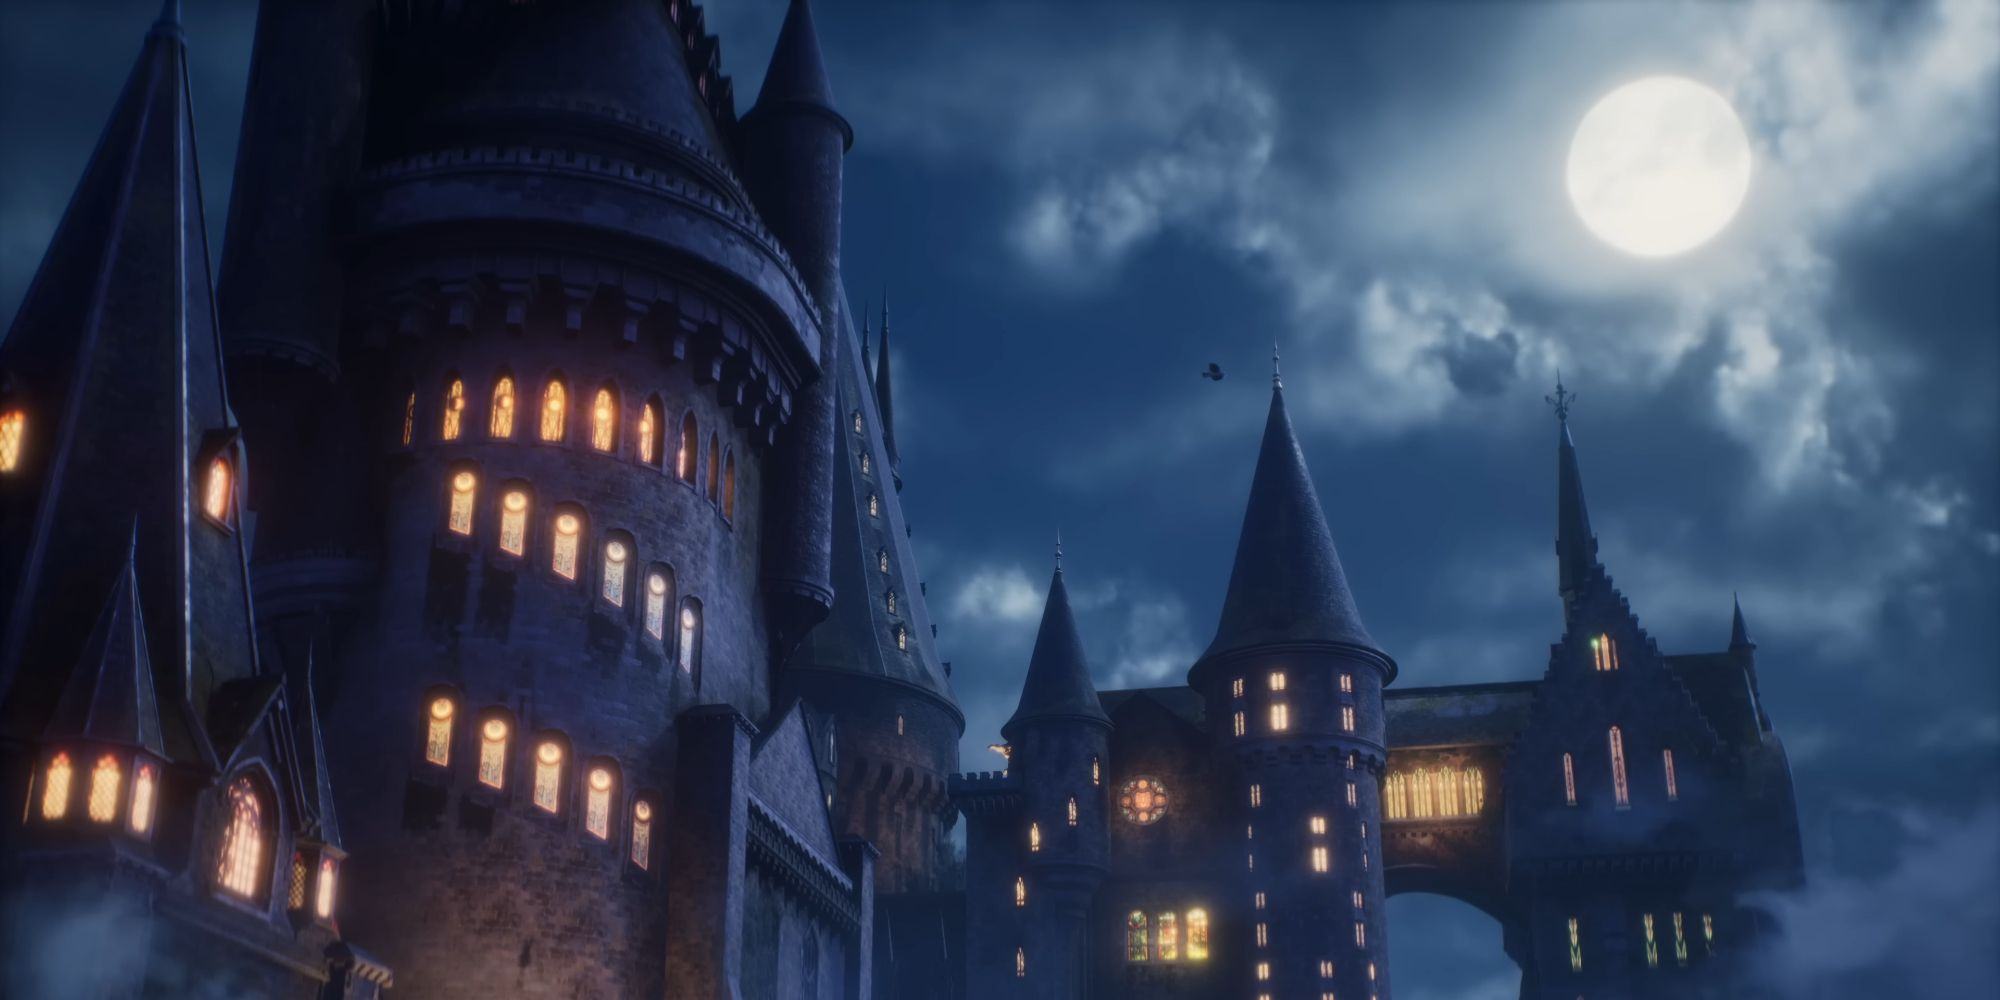 Hogwarts Heritage Castle under the full moon with illuminated windows and an owl flying above.